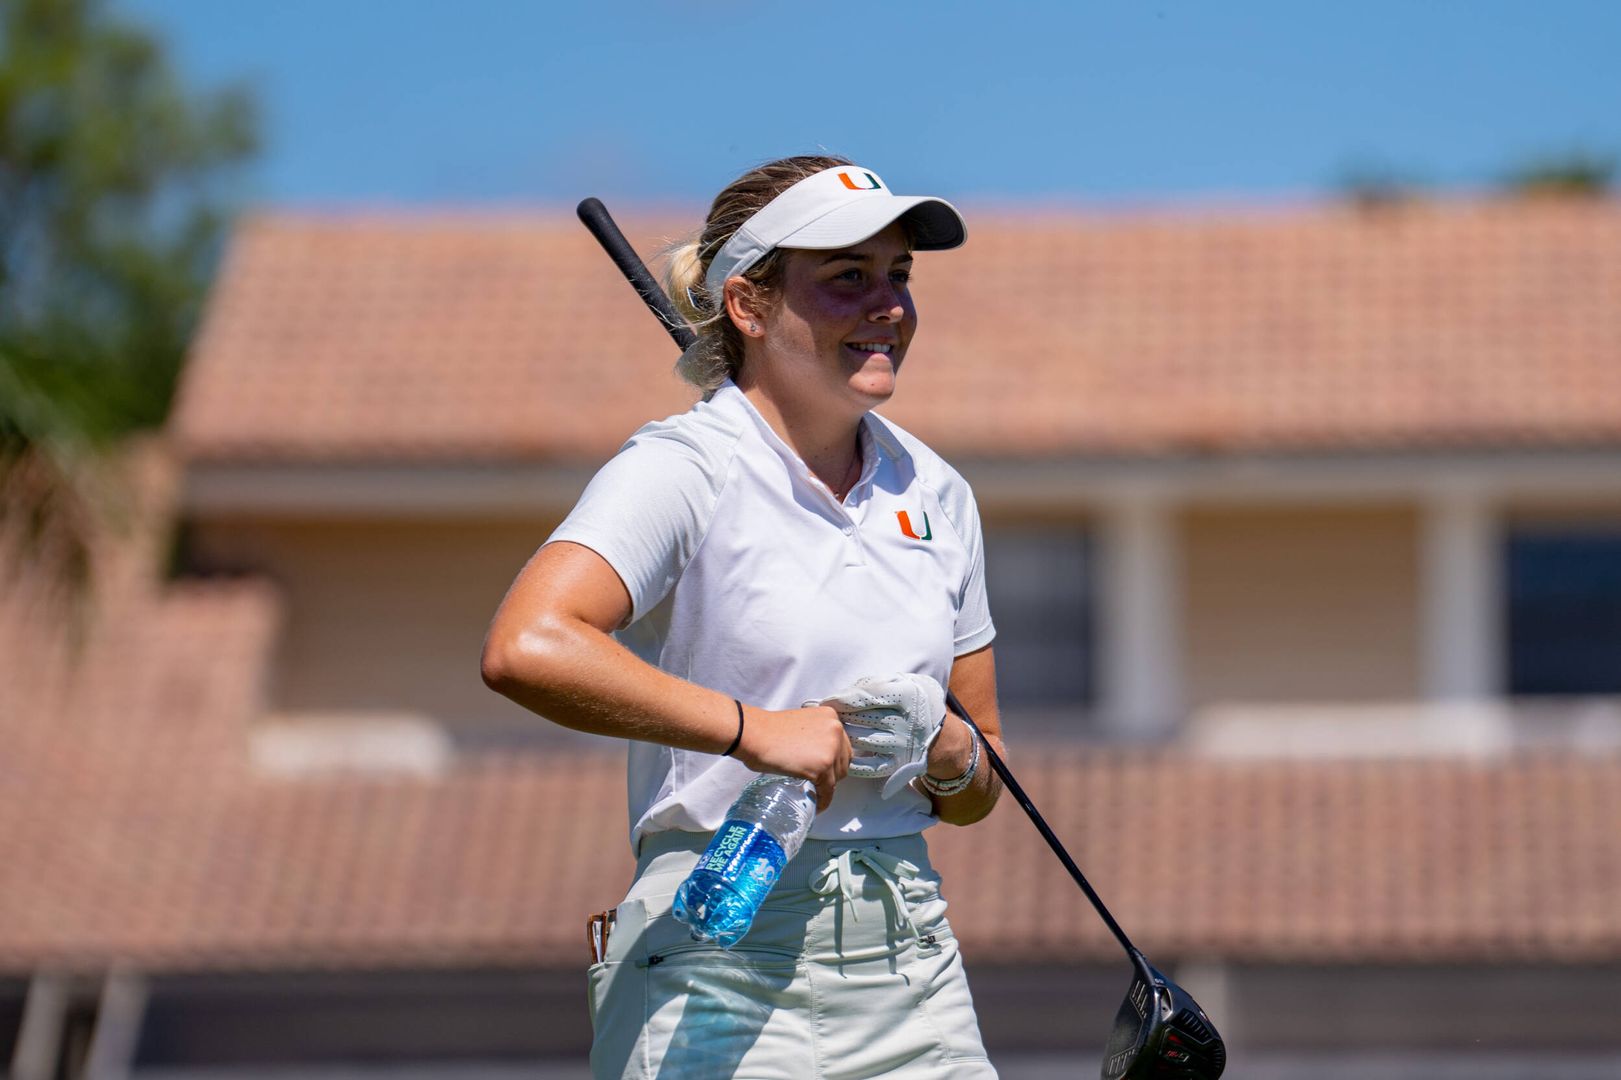 Byrne Advances to the NCAA DI Women’s Golf Championships Finals